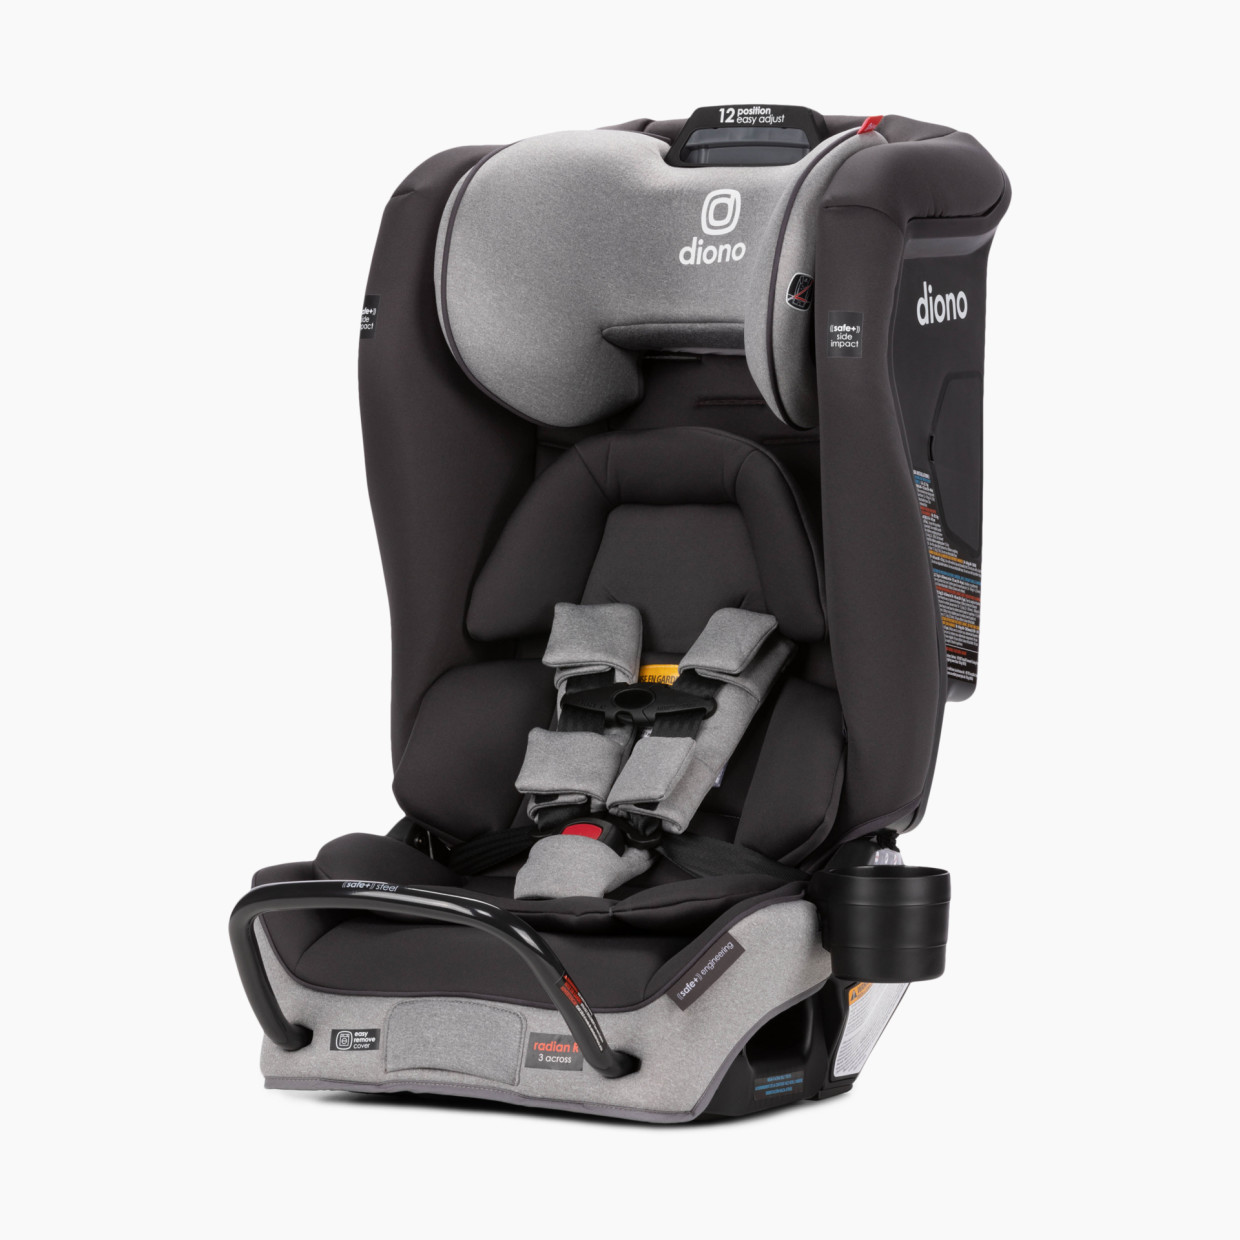 Diono Radian 3RXT SafePlus All-in-One Convertible Car Seat - Gray Slate.